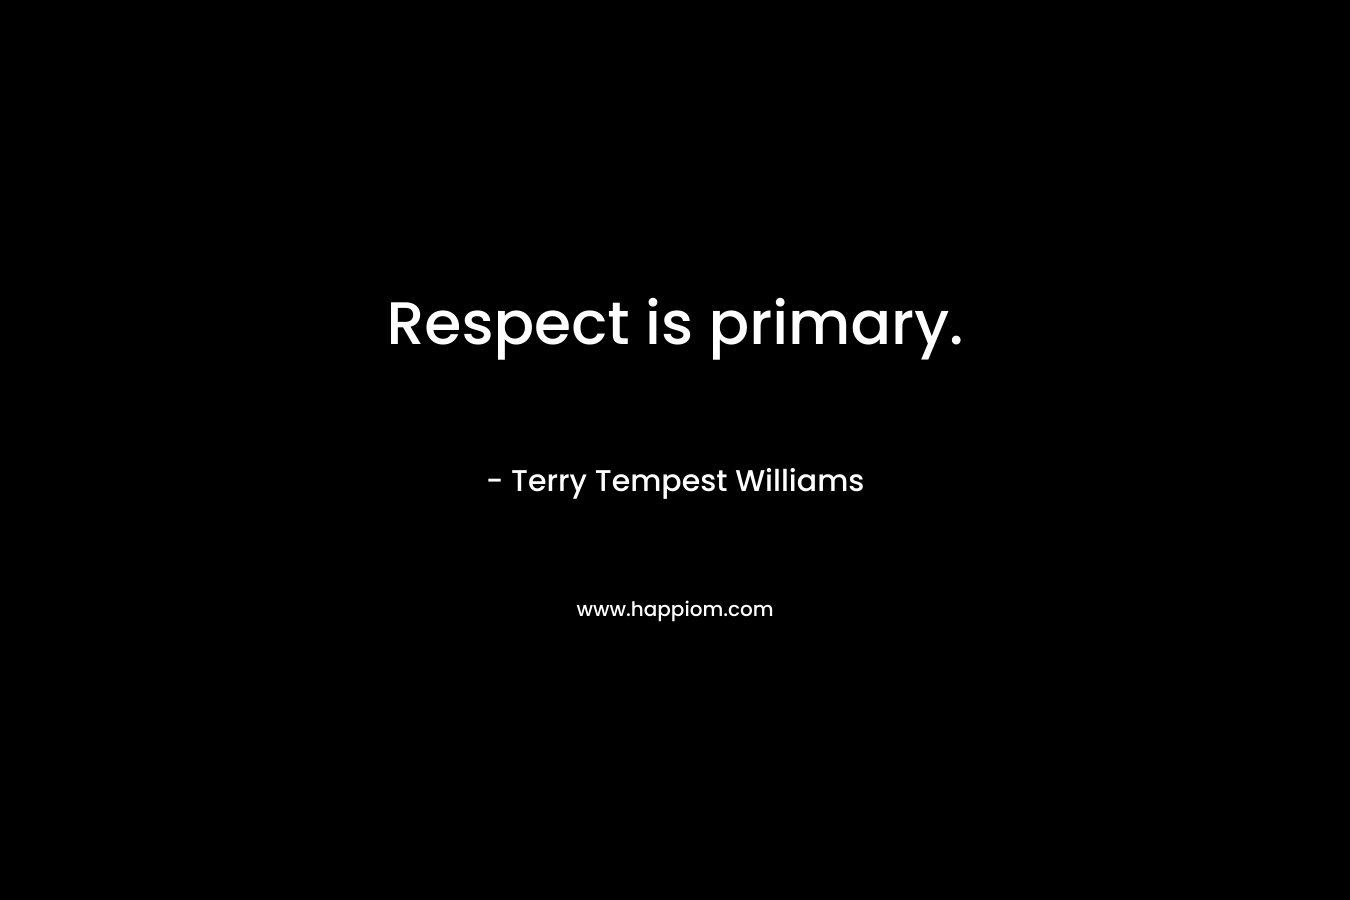 Respect is primary.